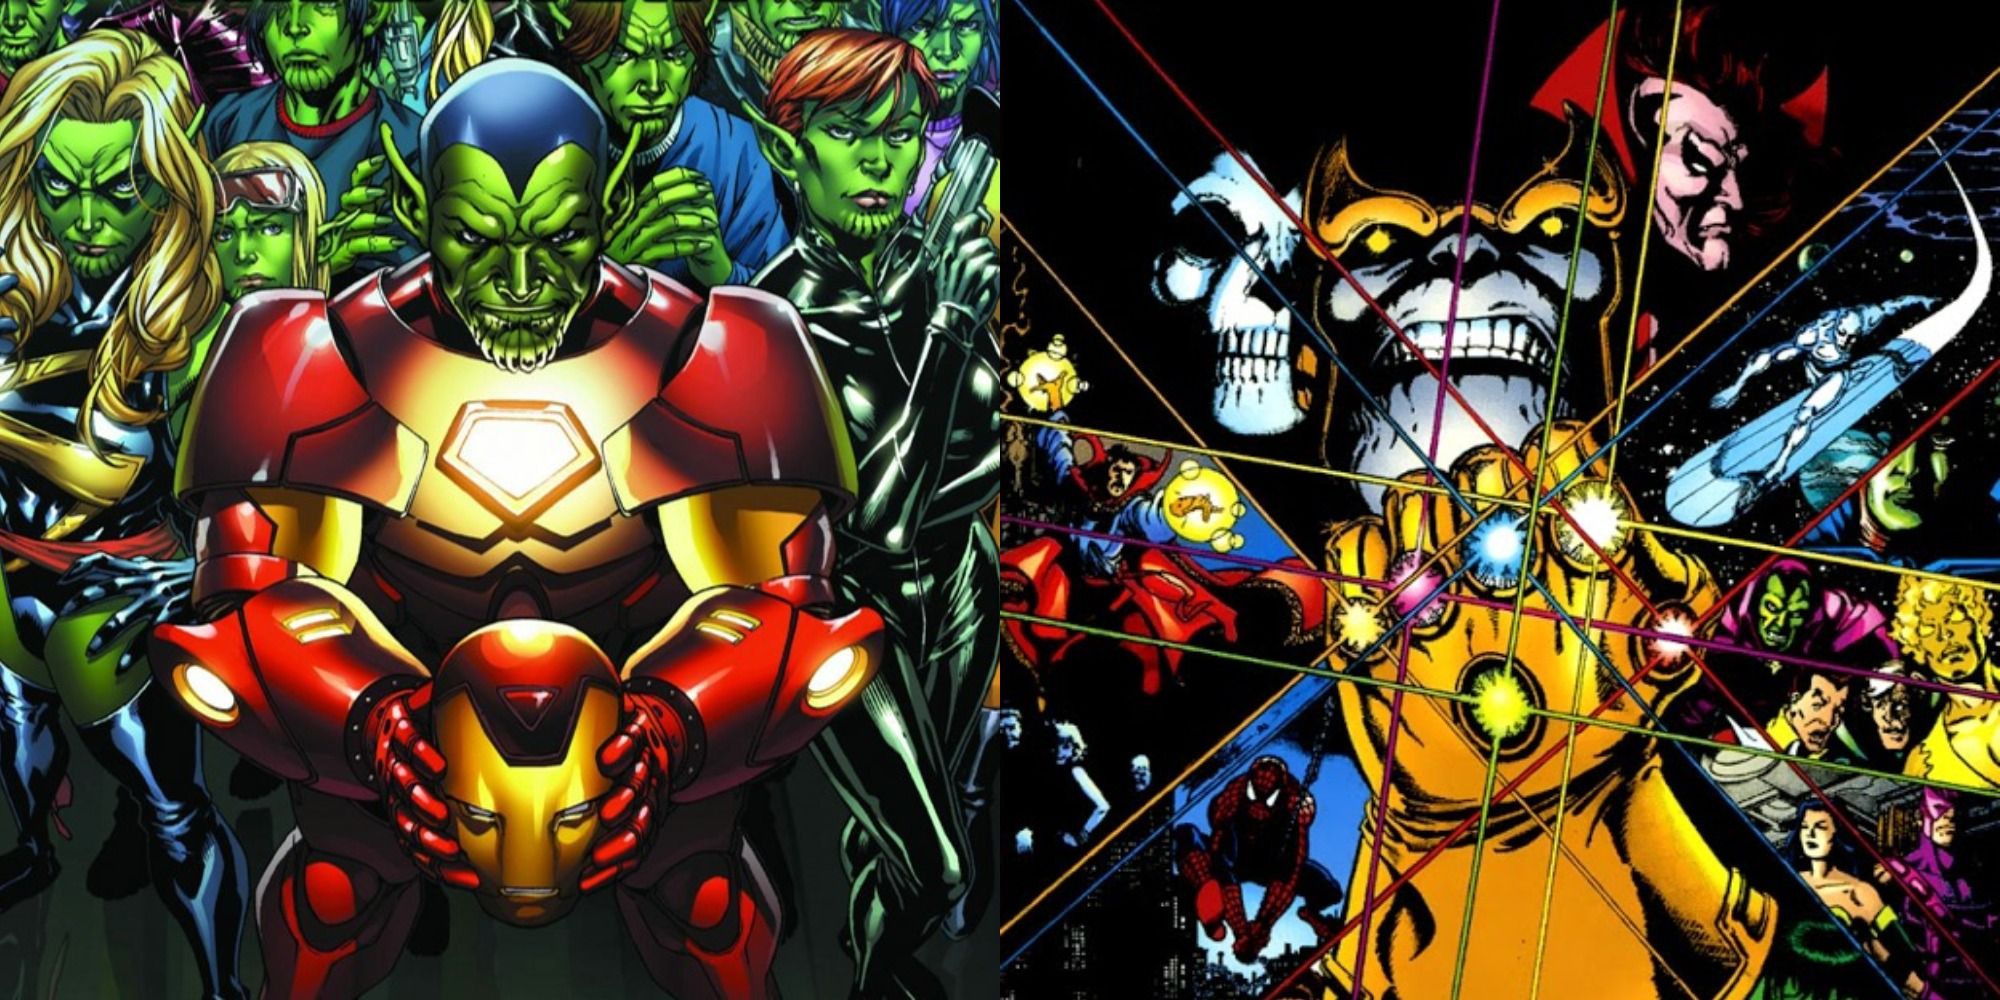 Split image showing the Skrulls in heroes' costumes and Thanos with the Infinity Gauntlet in Marvel comics